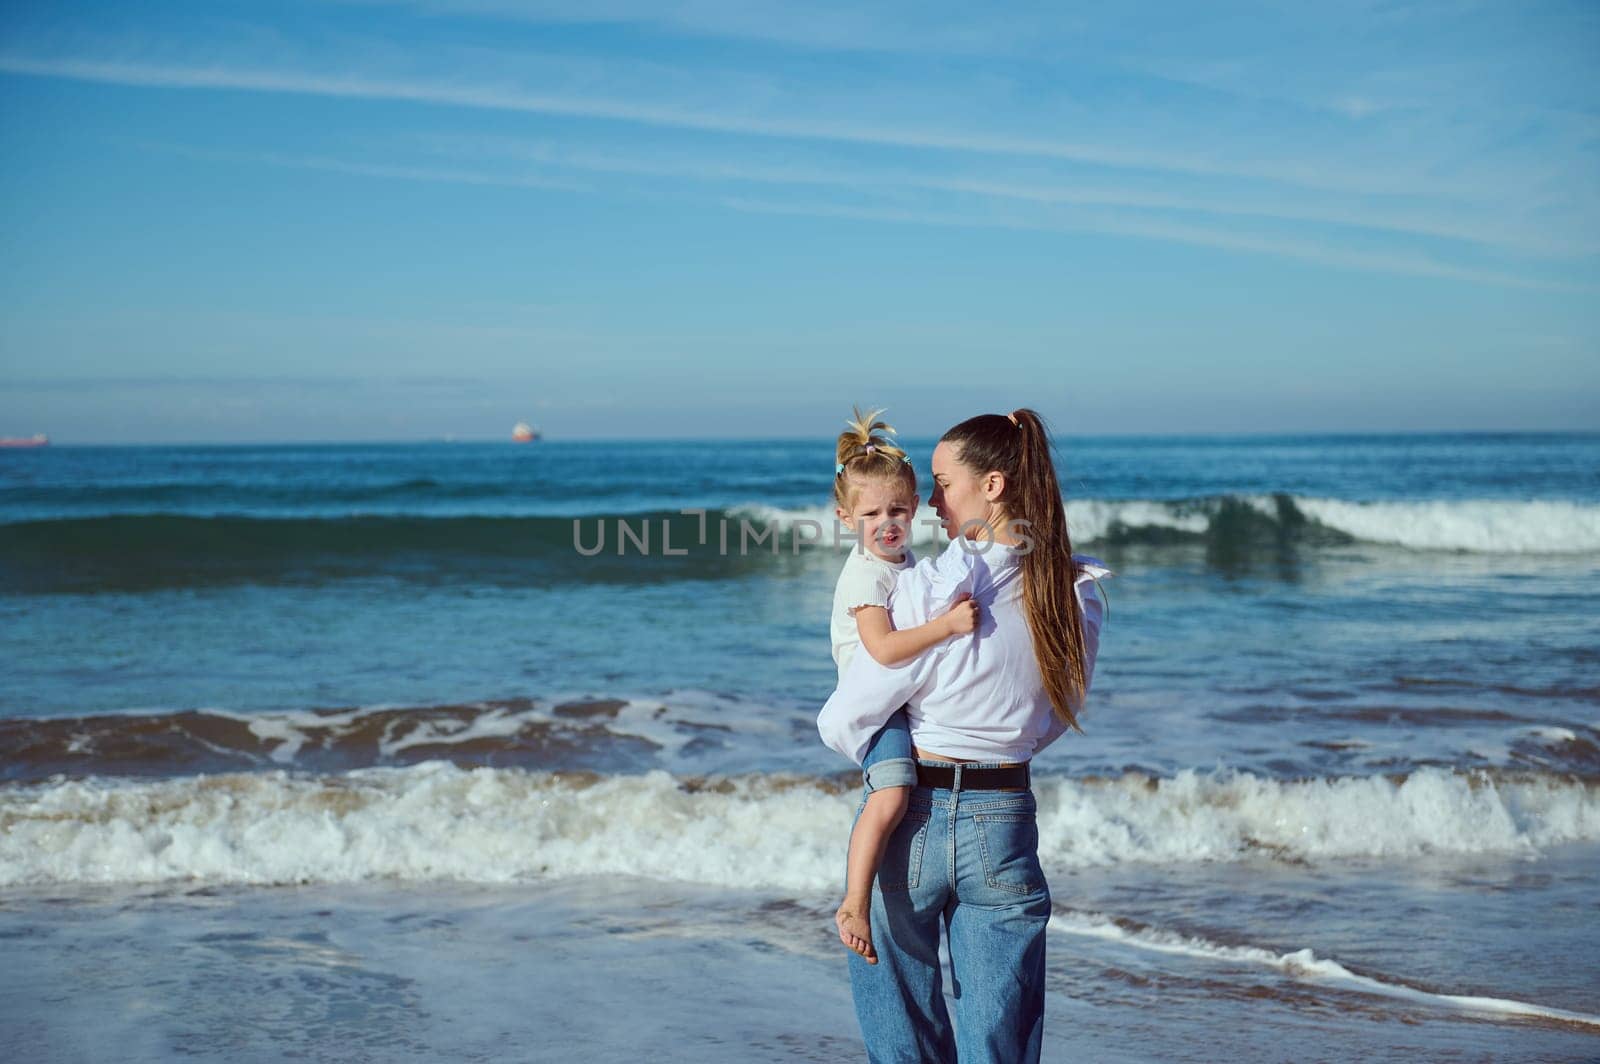 A beautiful young mother carries her baby in her arms, an adorable little girl, walking together barefoot on the beach. by artgf